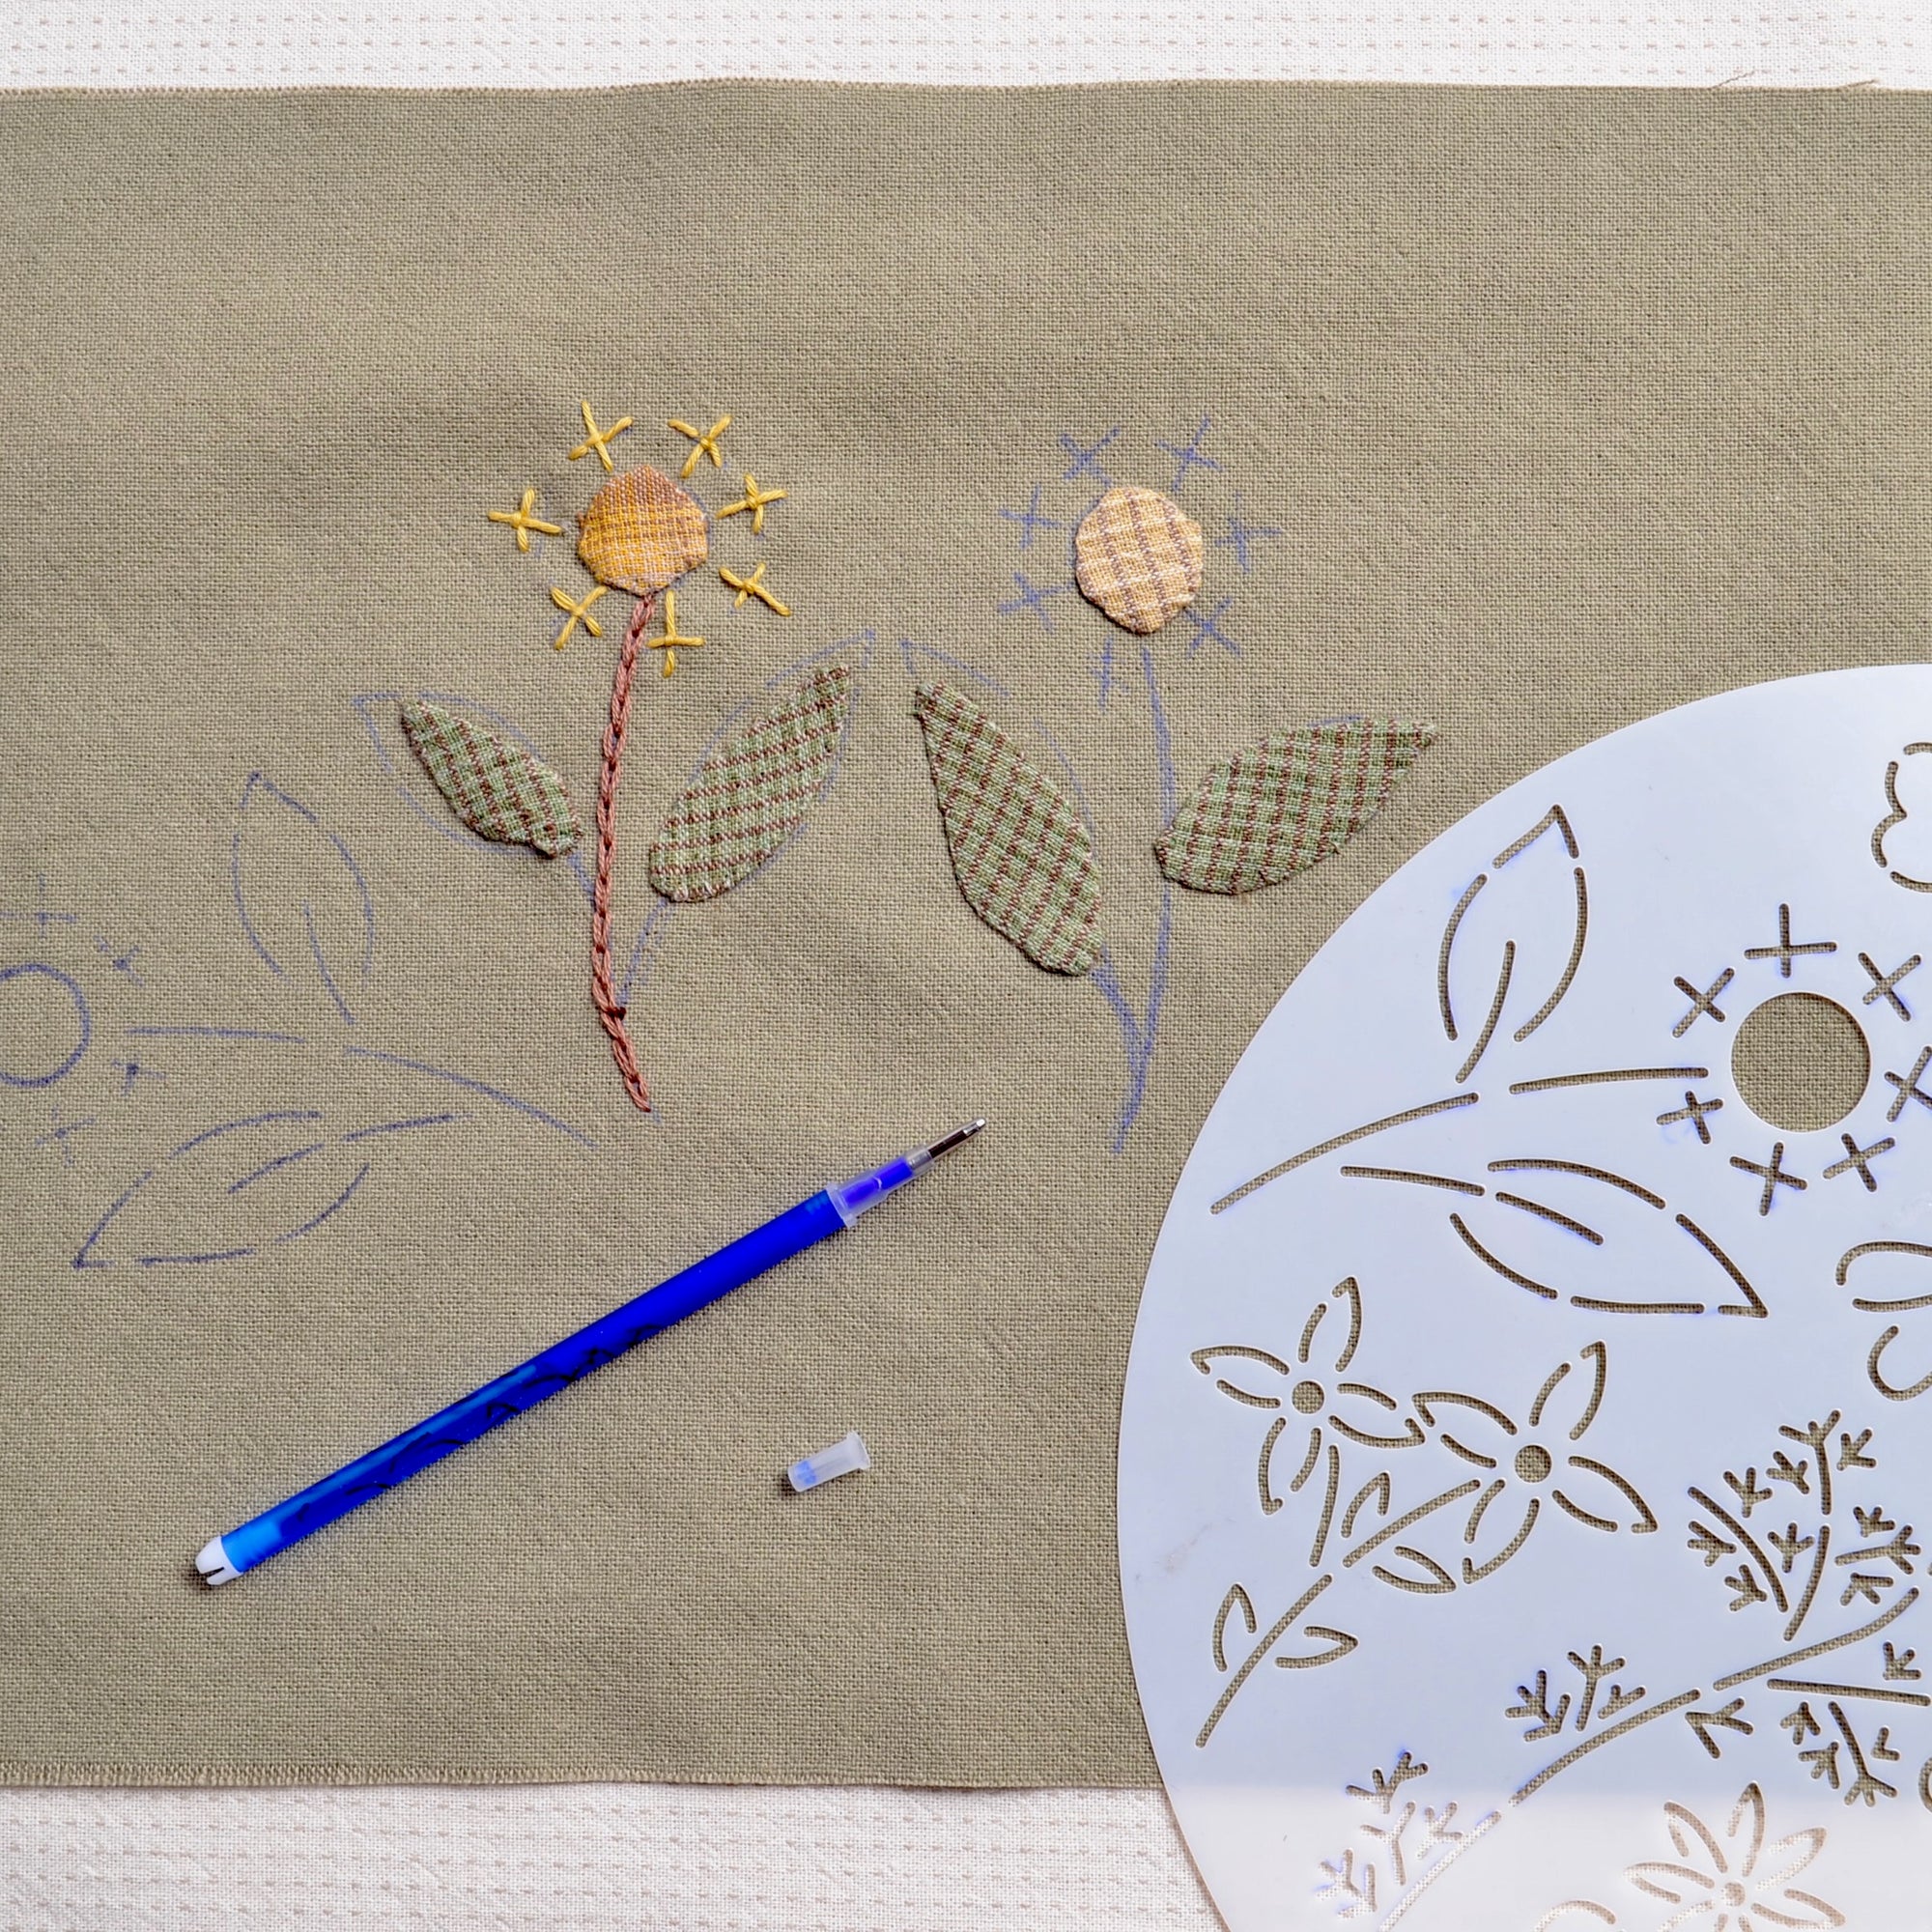 Embroidery Stencil for Applique and Stitching #109 - A Threaded Needle